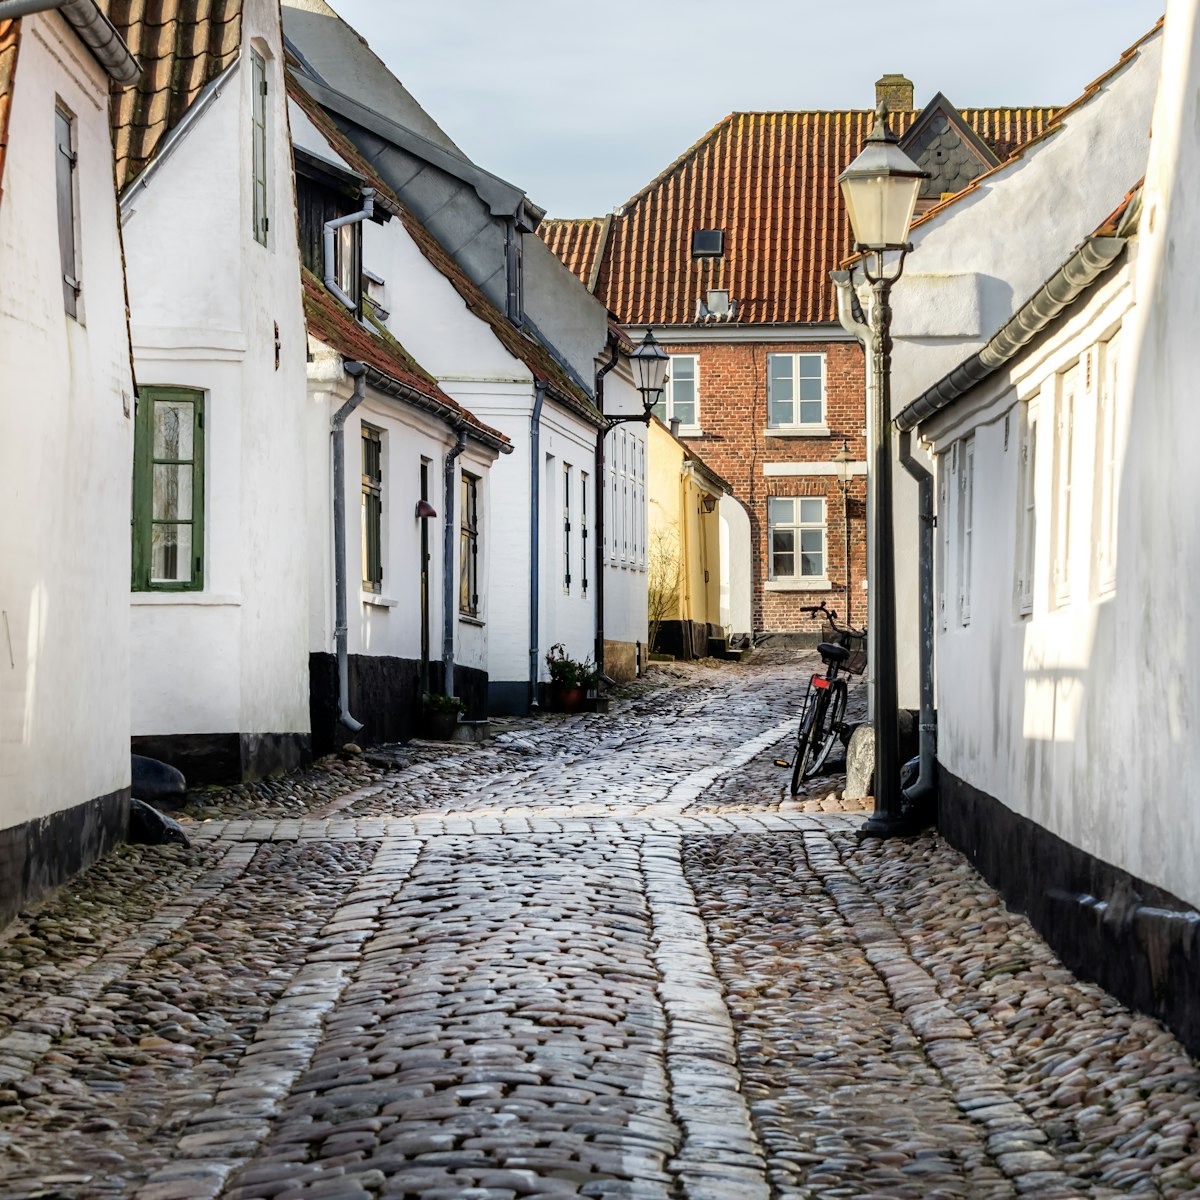 Homes on cobbled streets in Ribe.